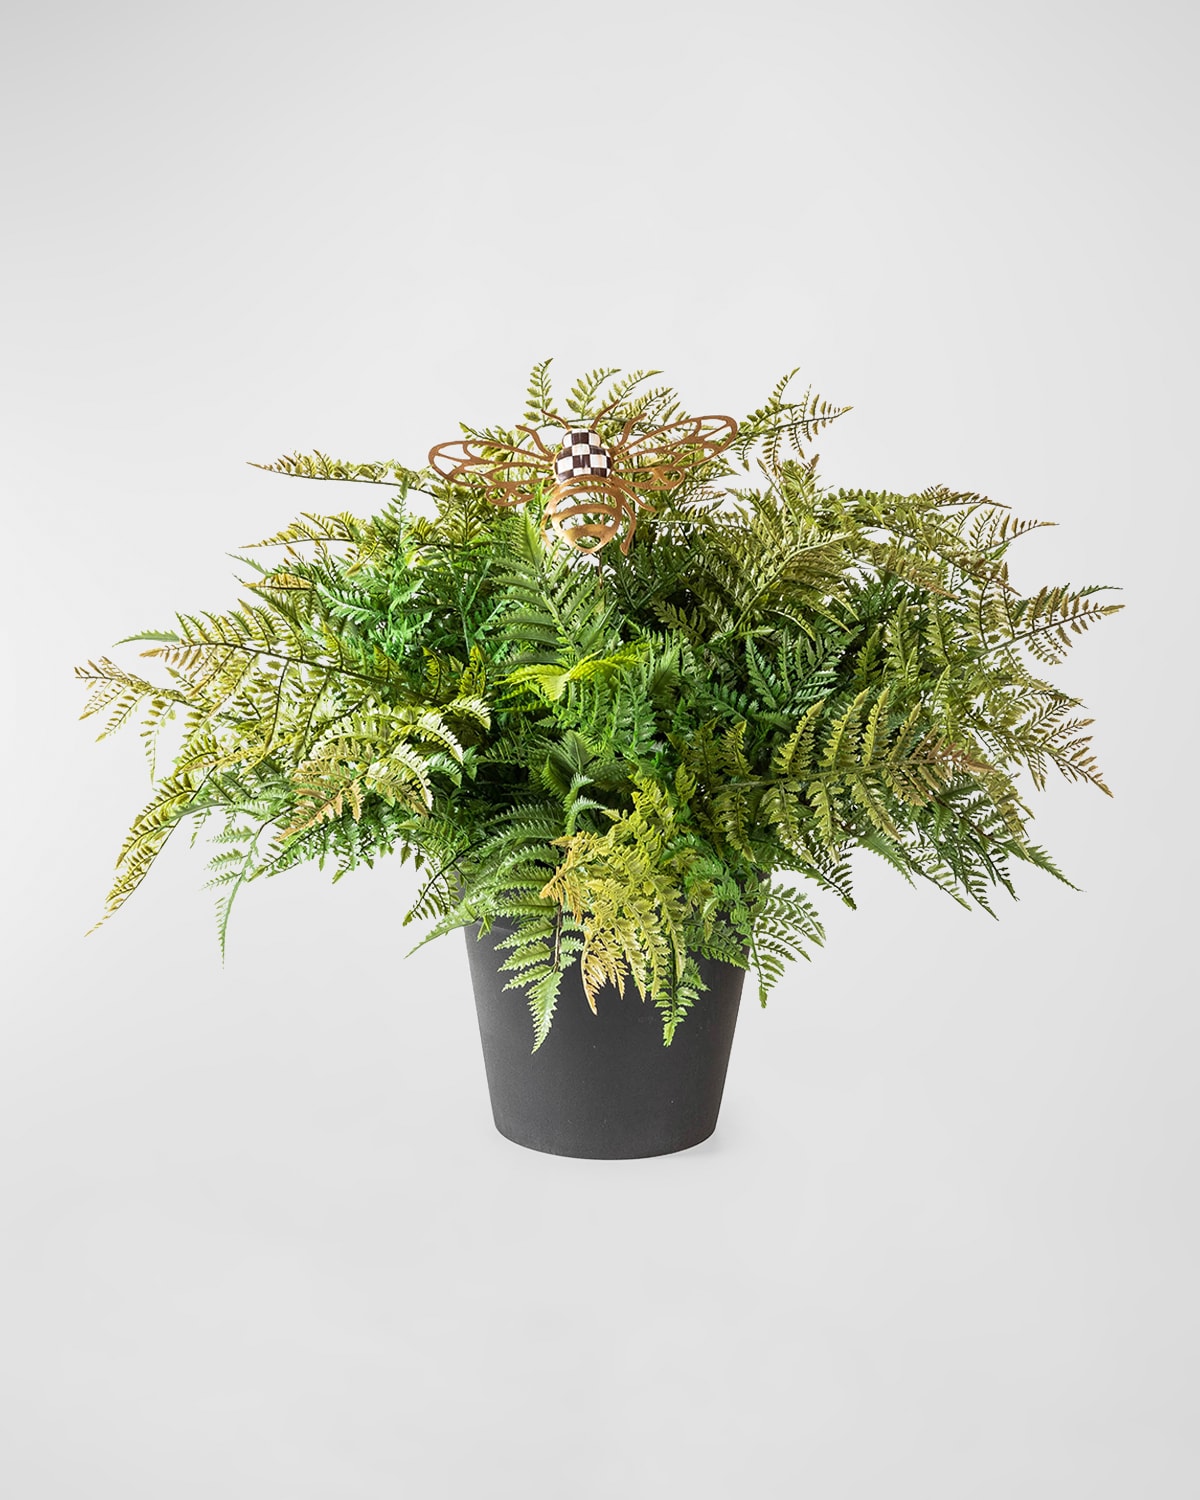 Mackenzie-childs Large Potted Fern With Bee Stake In Gray